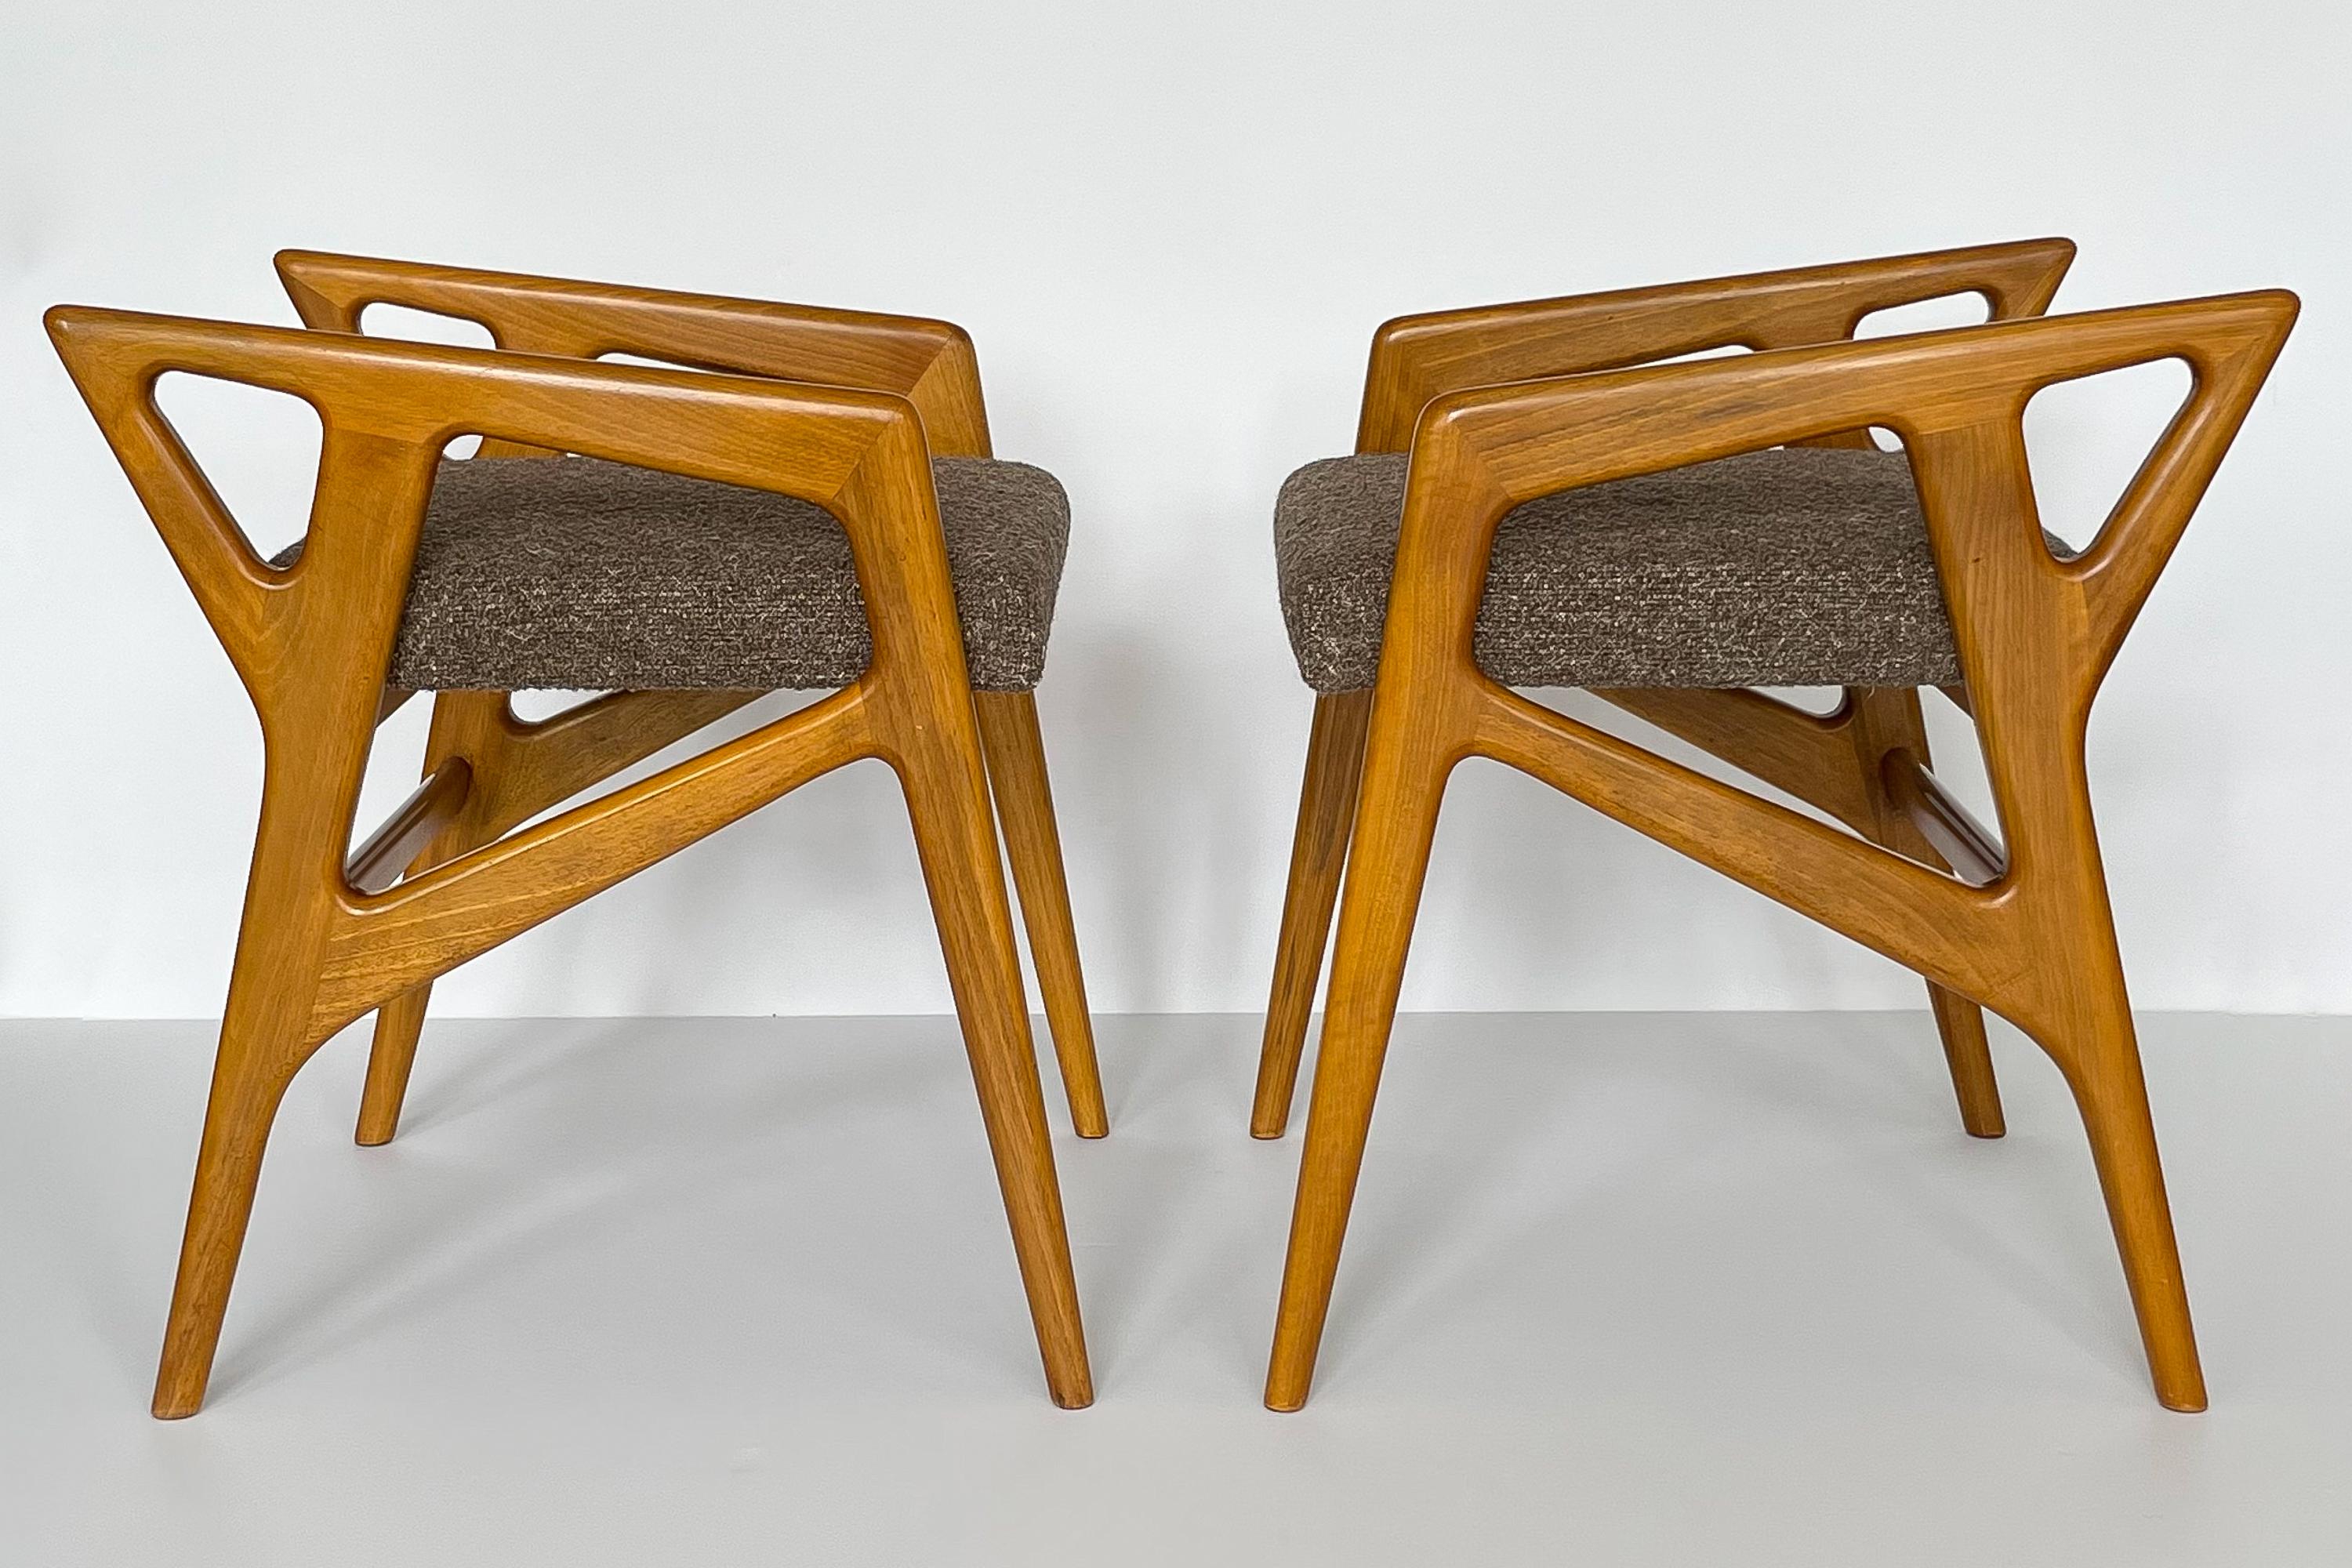 A remarkable pair of sculptural Italian walnut stools designed by the legendary Gio Ponti, dating back to the 1950s. These stunning stools are a perfect blend of artistic flair and exceptional craftsmanship, making them a must-have for any